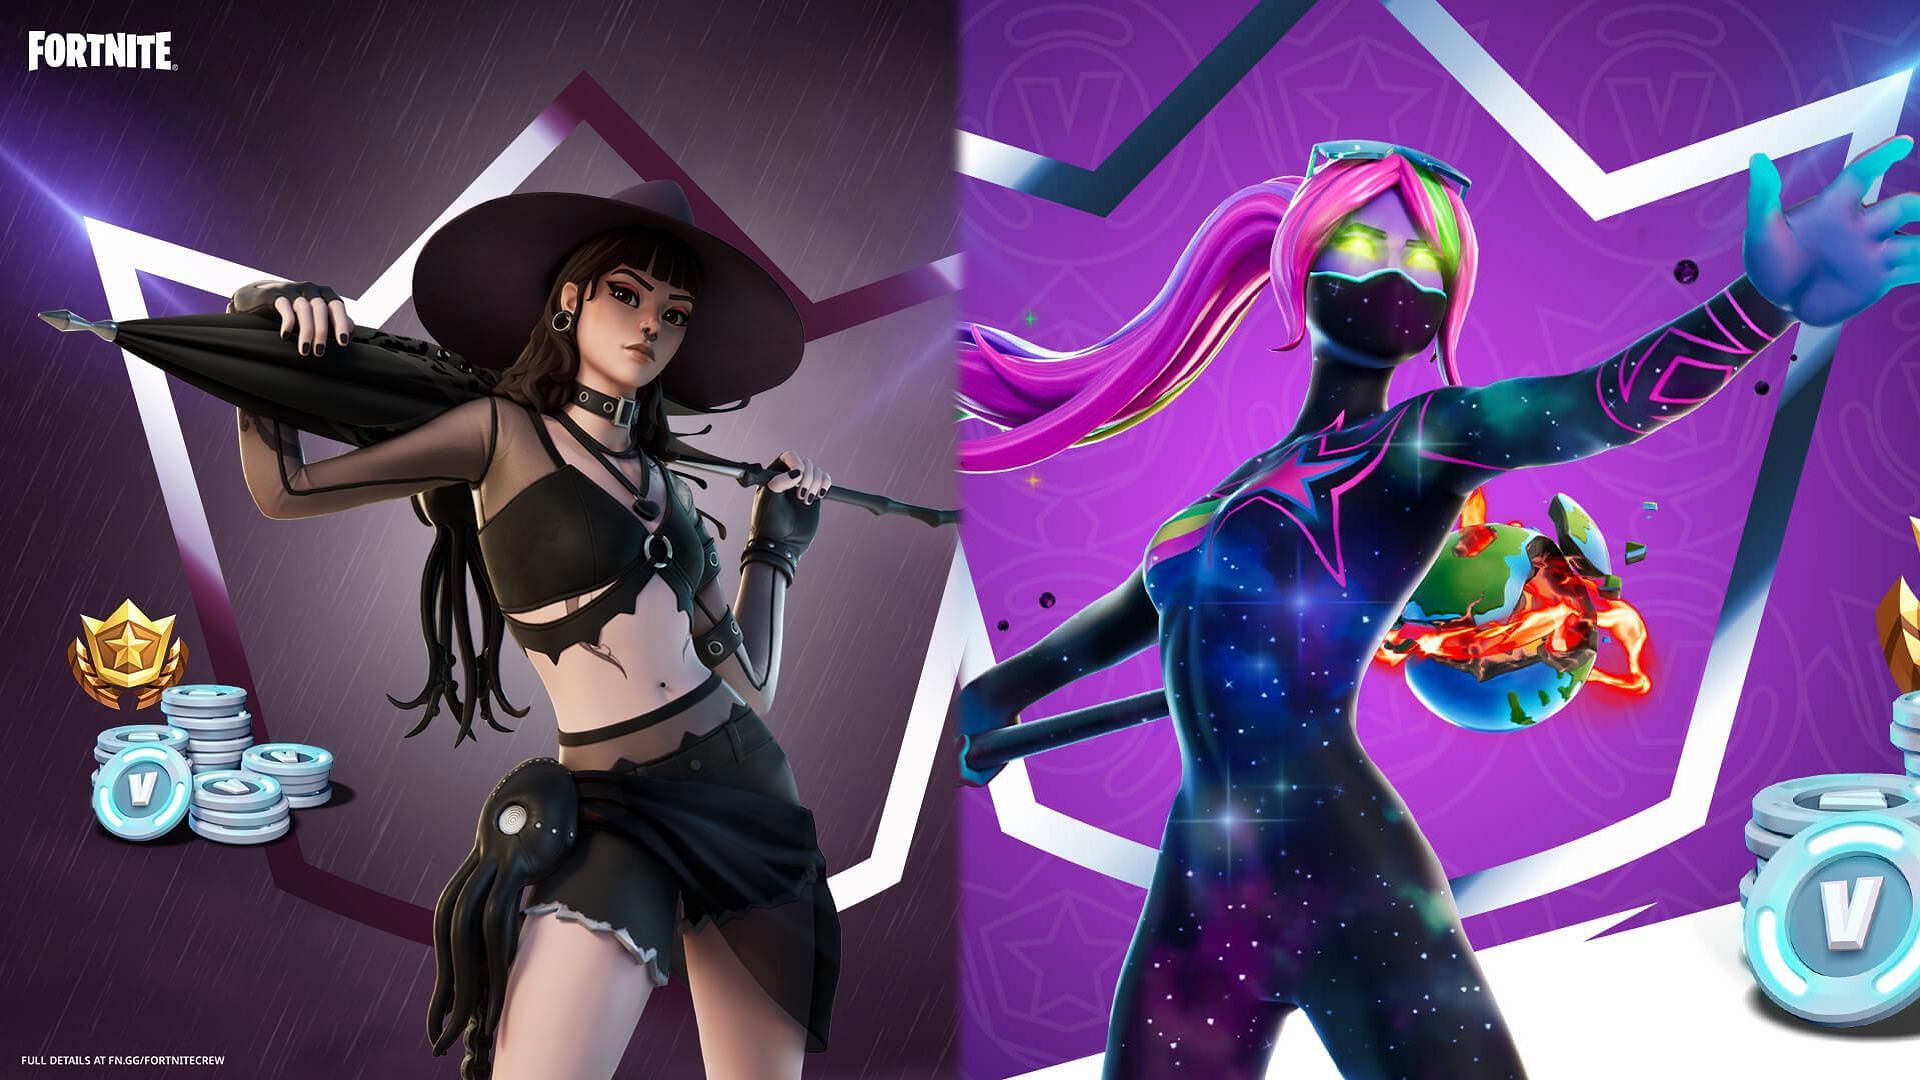 Phaedra and Galaxia are among the best Fortnite Crew skins of all time (Image via Sportskeeda)